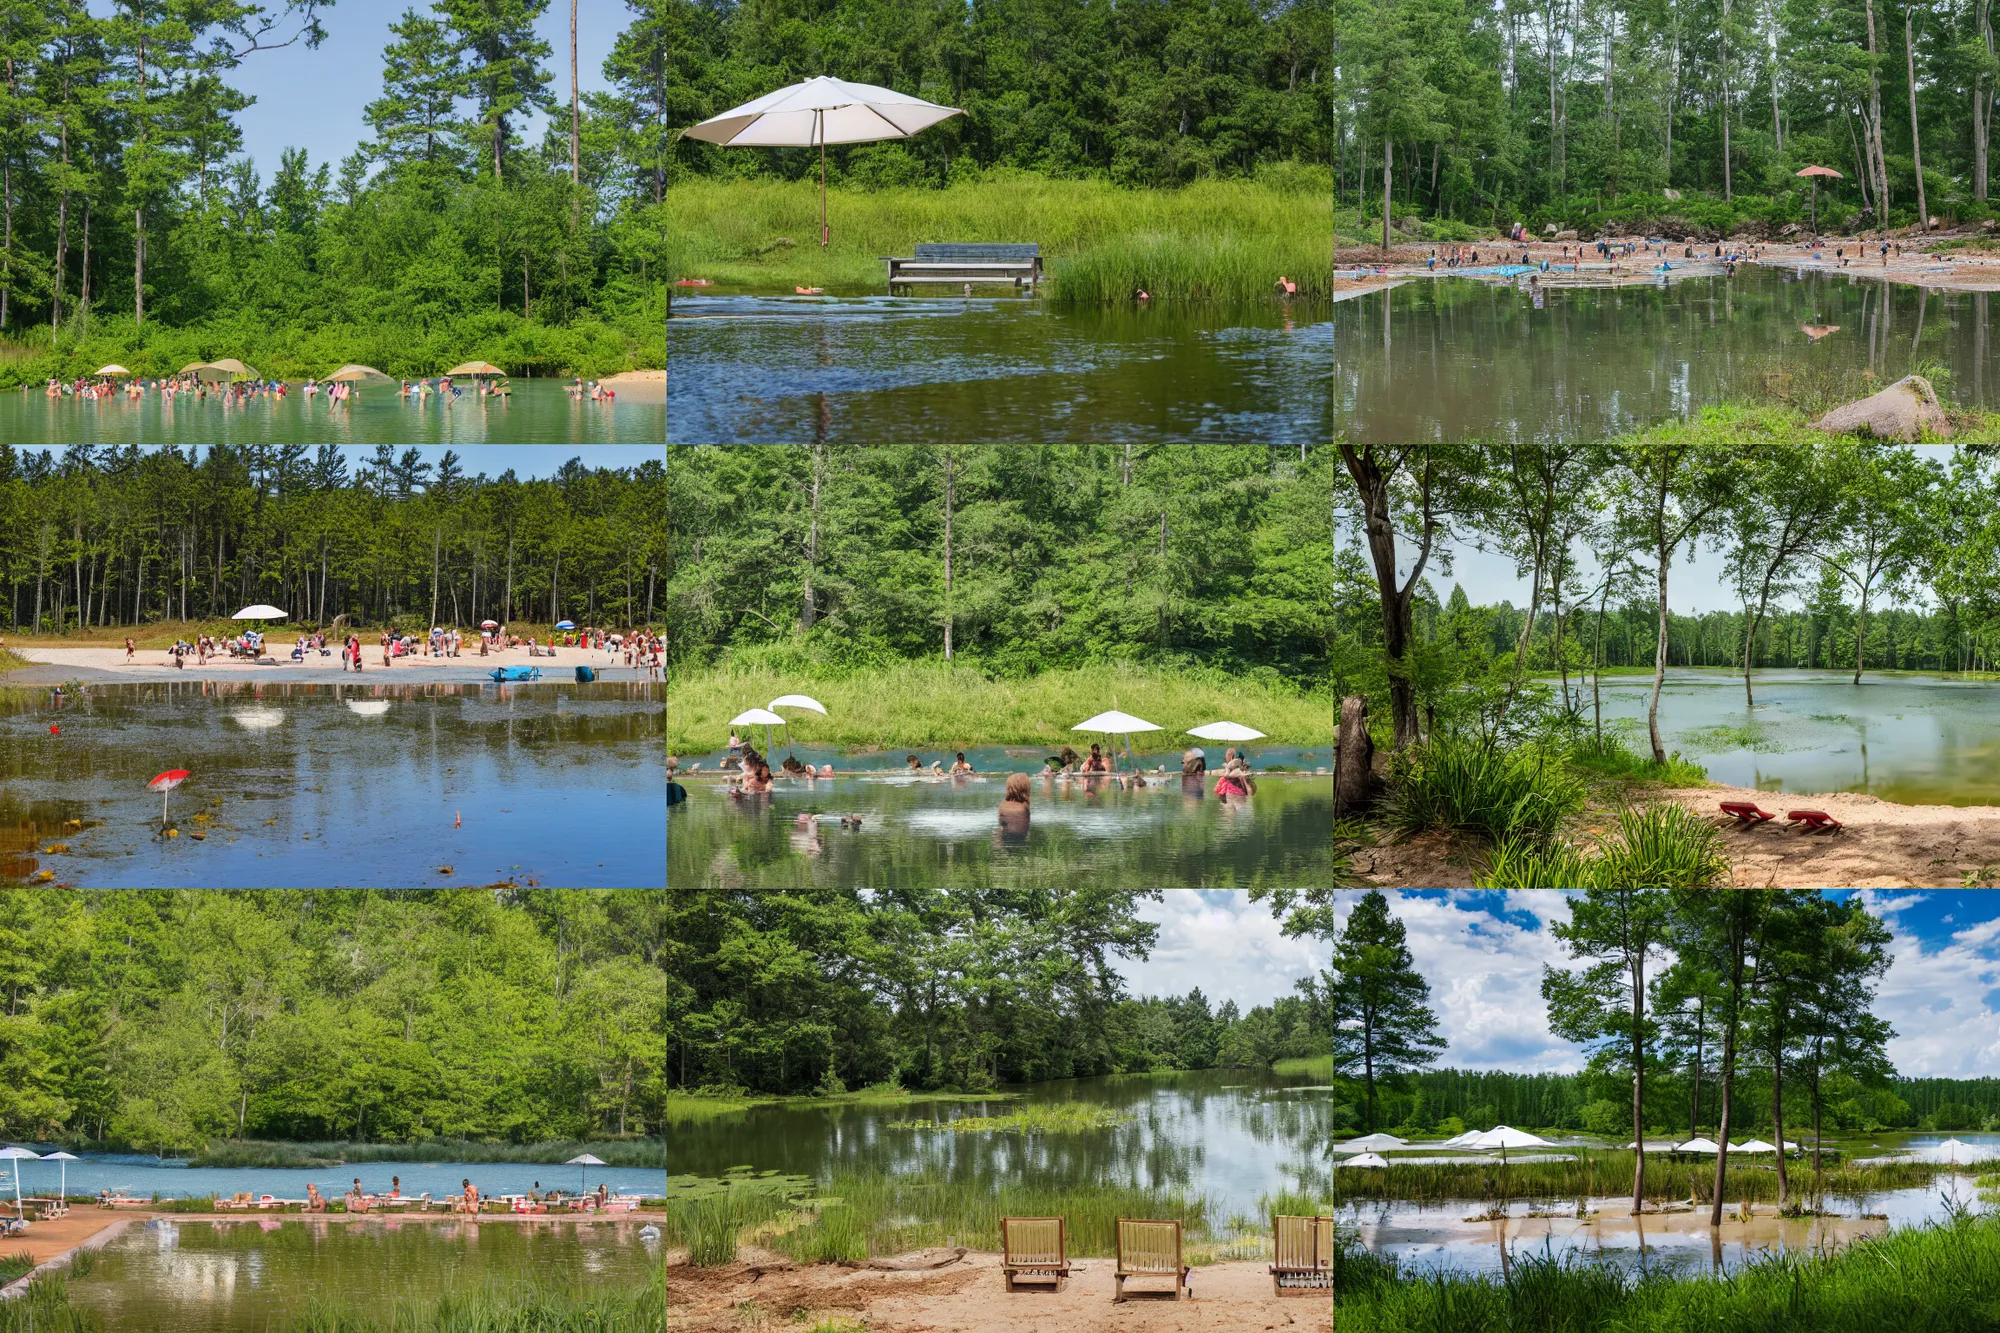 Prompt: view of a small pond with muddy water and a small beach. a few big white umbrellas with benches underneath them are on the beach. a thick piney forest is seen in the background behind the pond. people are swimming. photo taken from a grass surface. 4 k outdoor image, landscape photography.